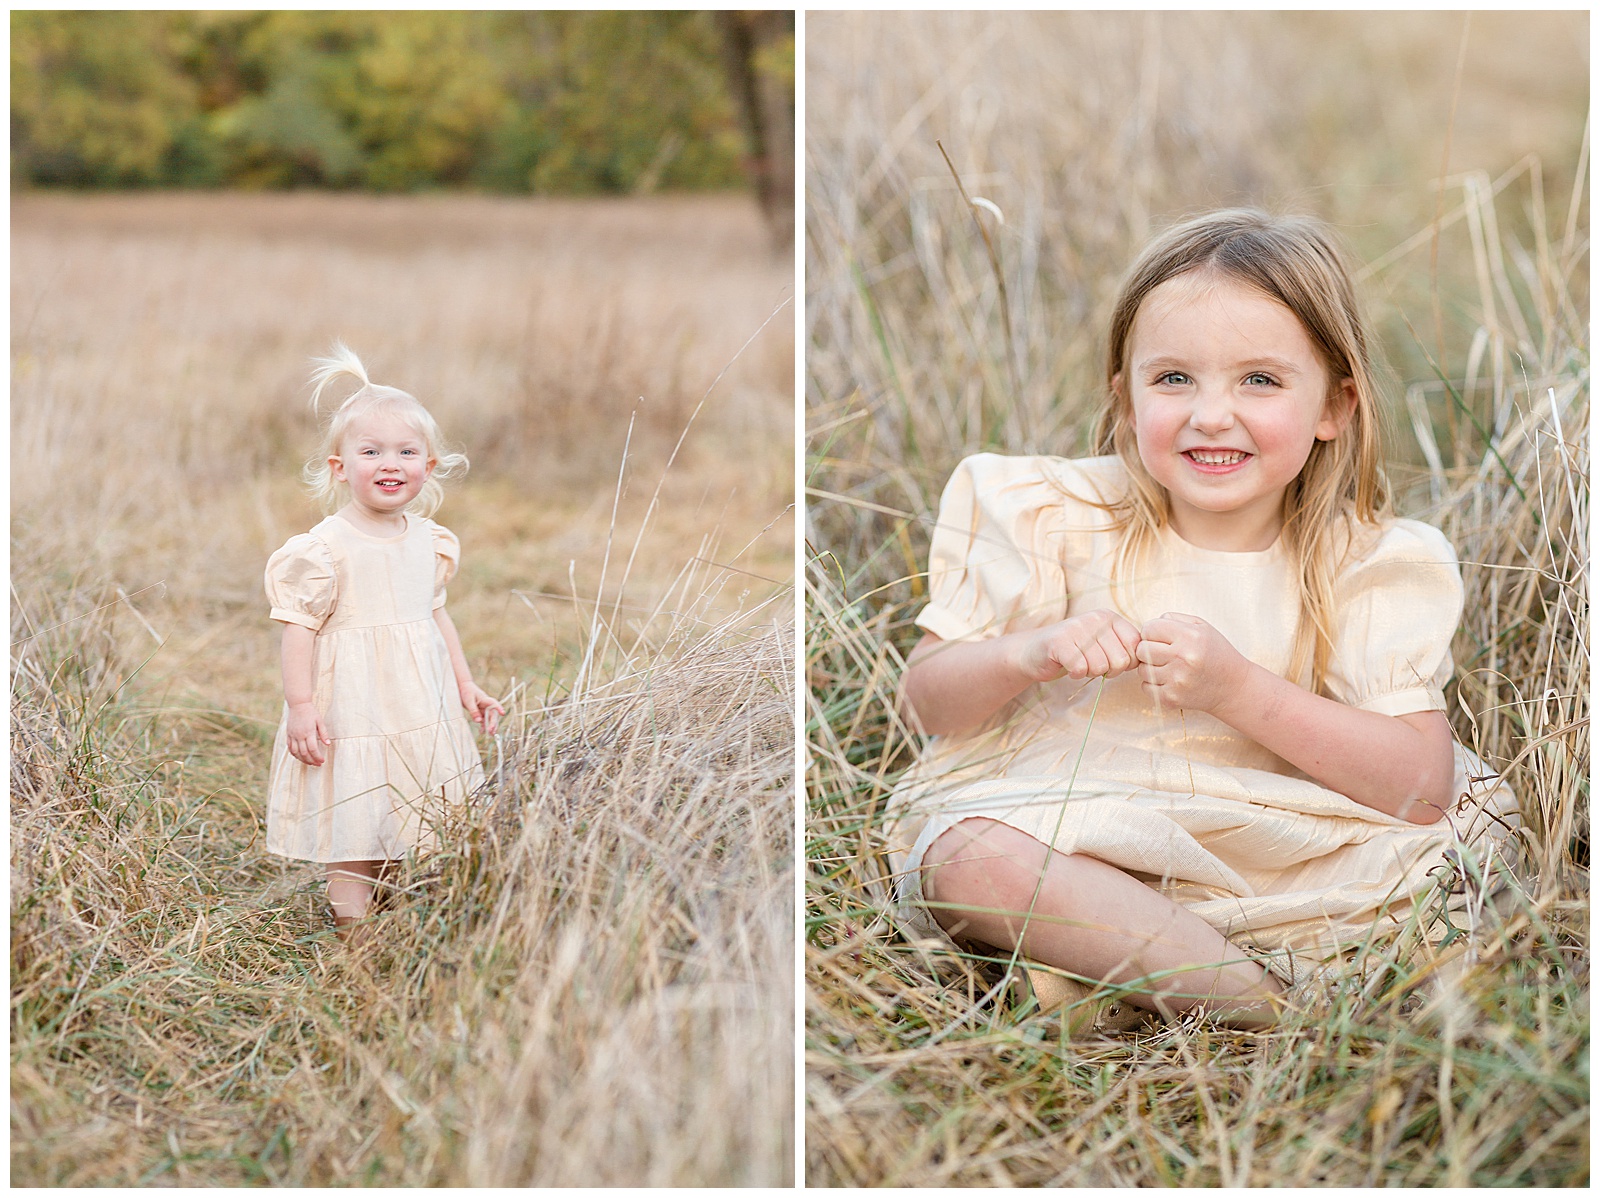 Individual pictures of each daughter capture their personalities during their Nashville family session with Nashville family photographer, Rebecca Rice Photography.  Girls wear matching pale yellow/gold shimmery dresses as they both smile at the camera.